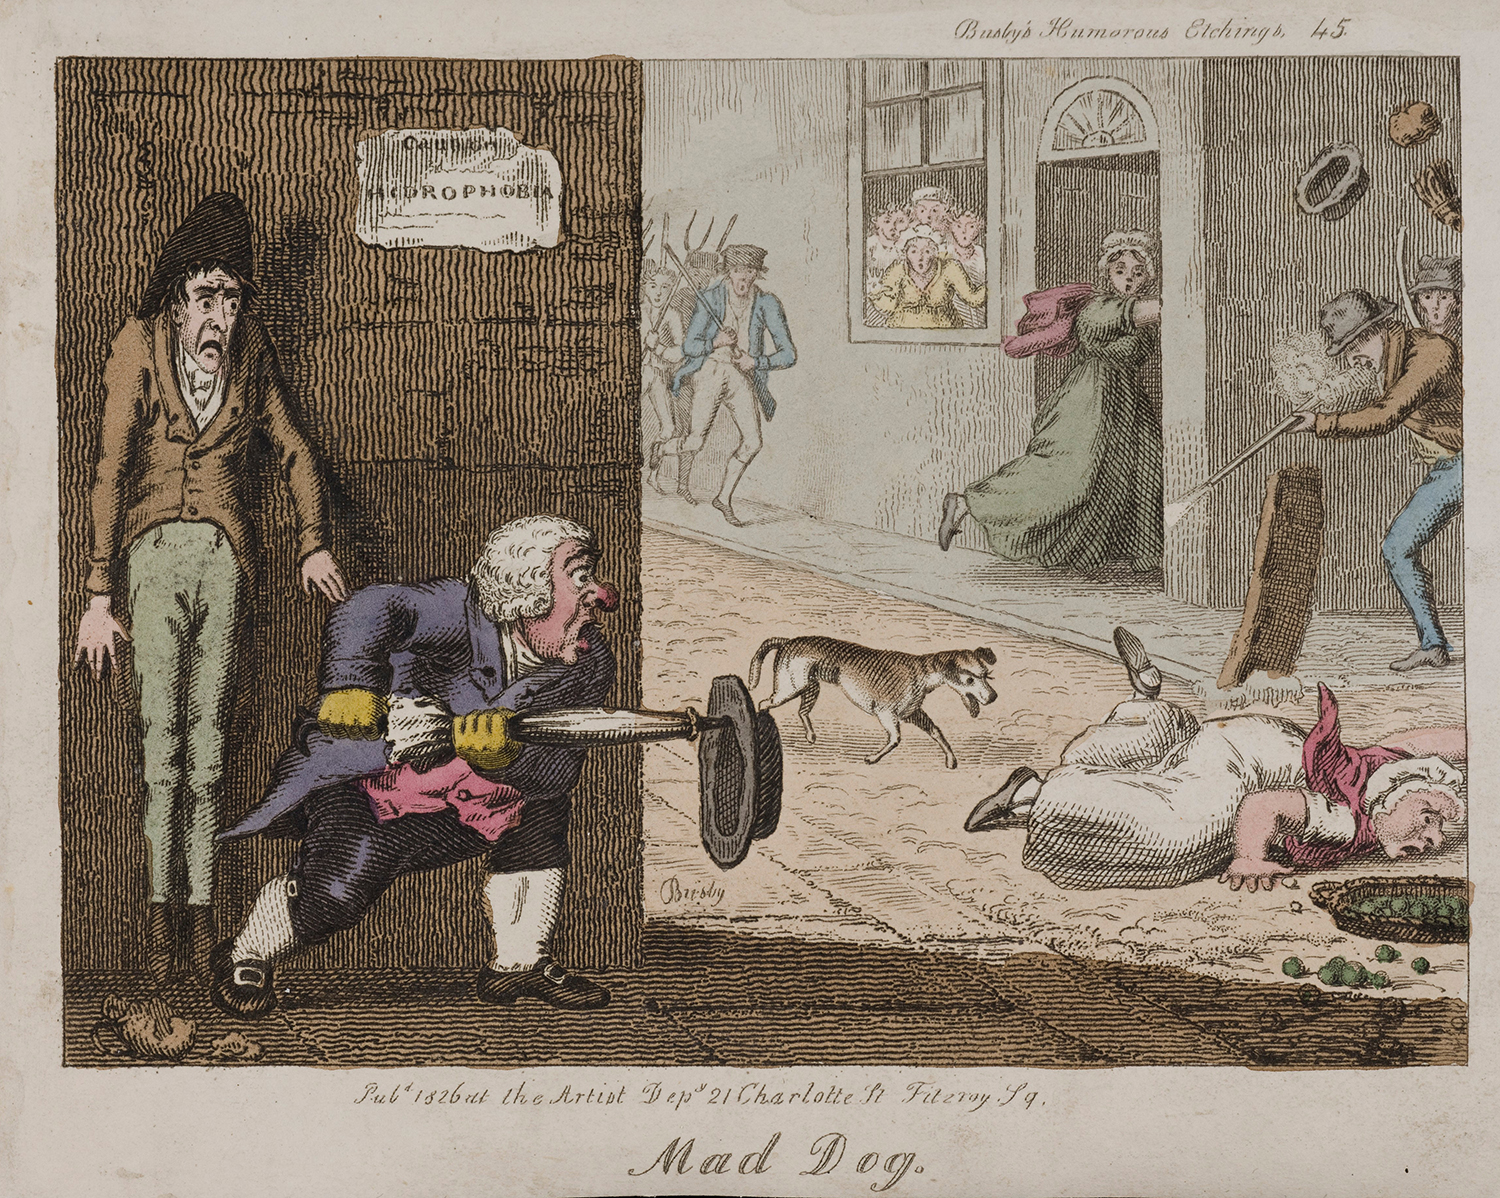 A mad dog on the run in a London street, T.L. Busby, 1826.